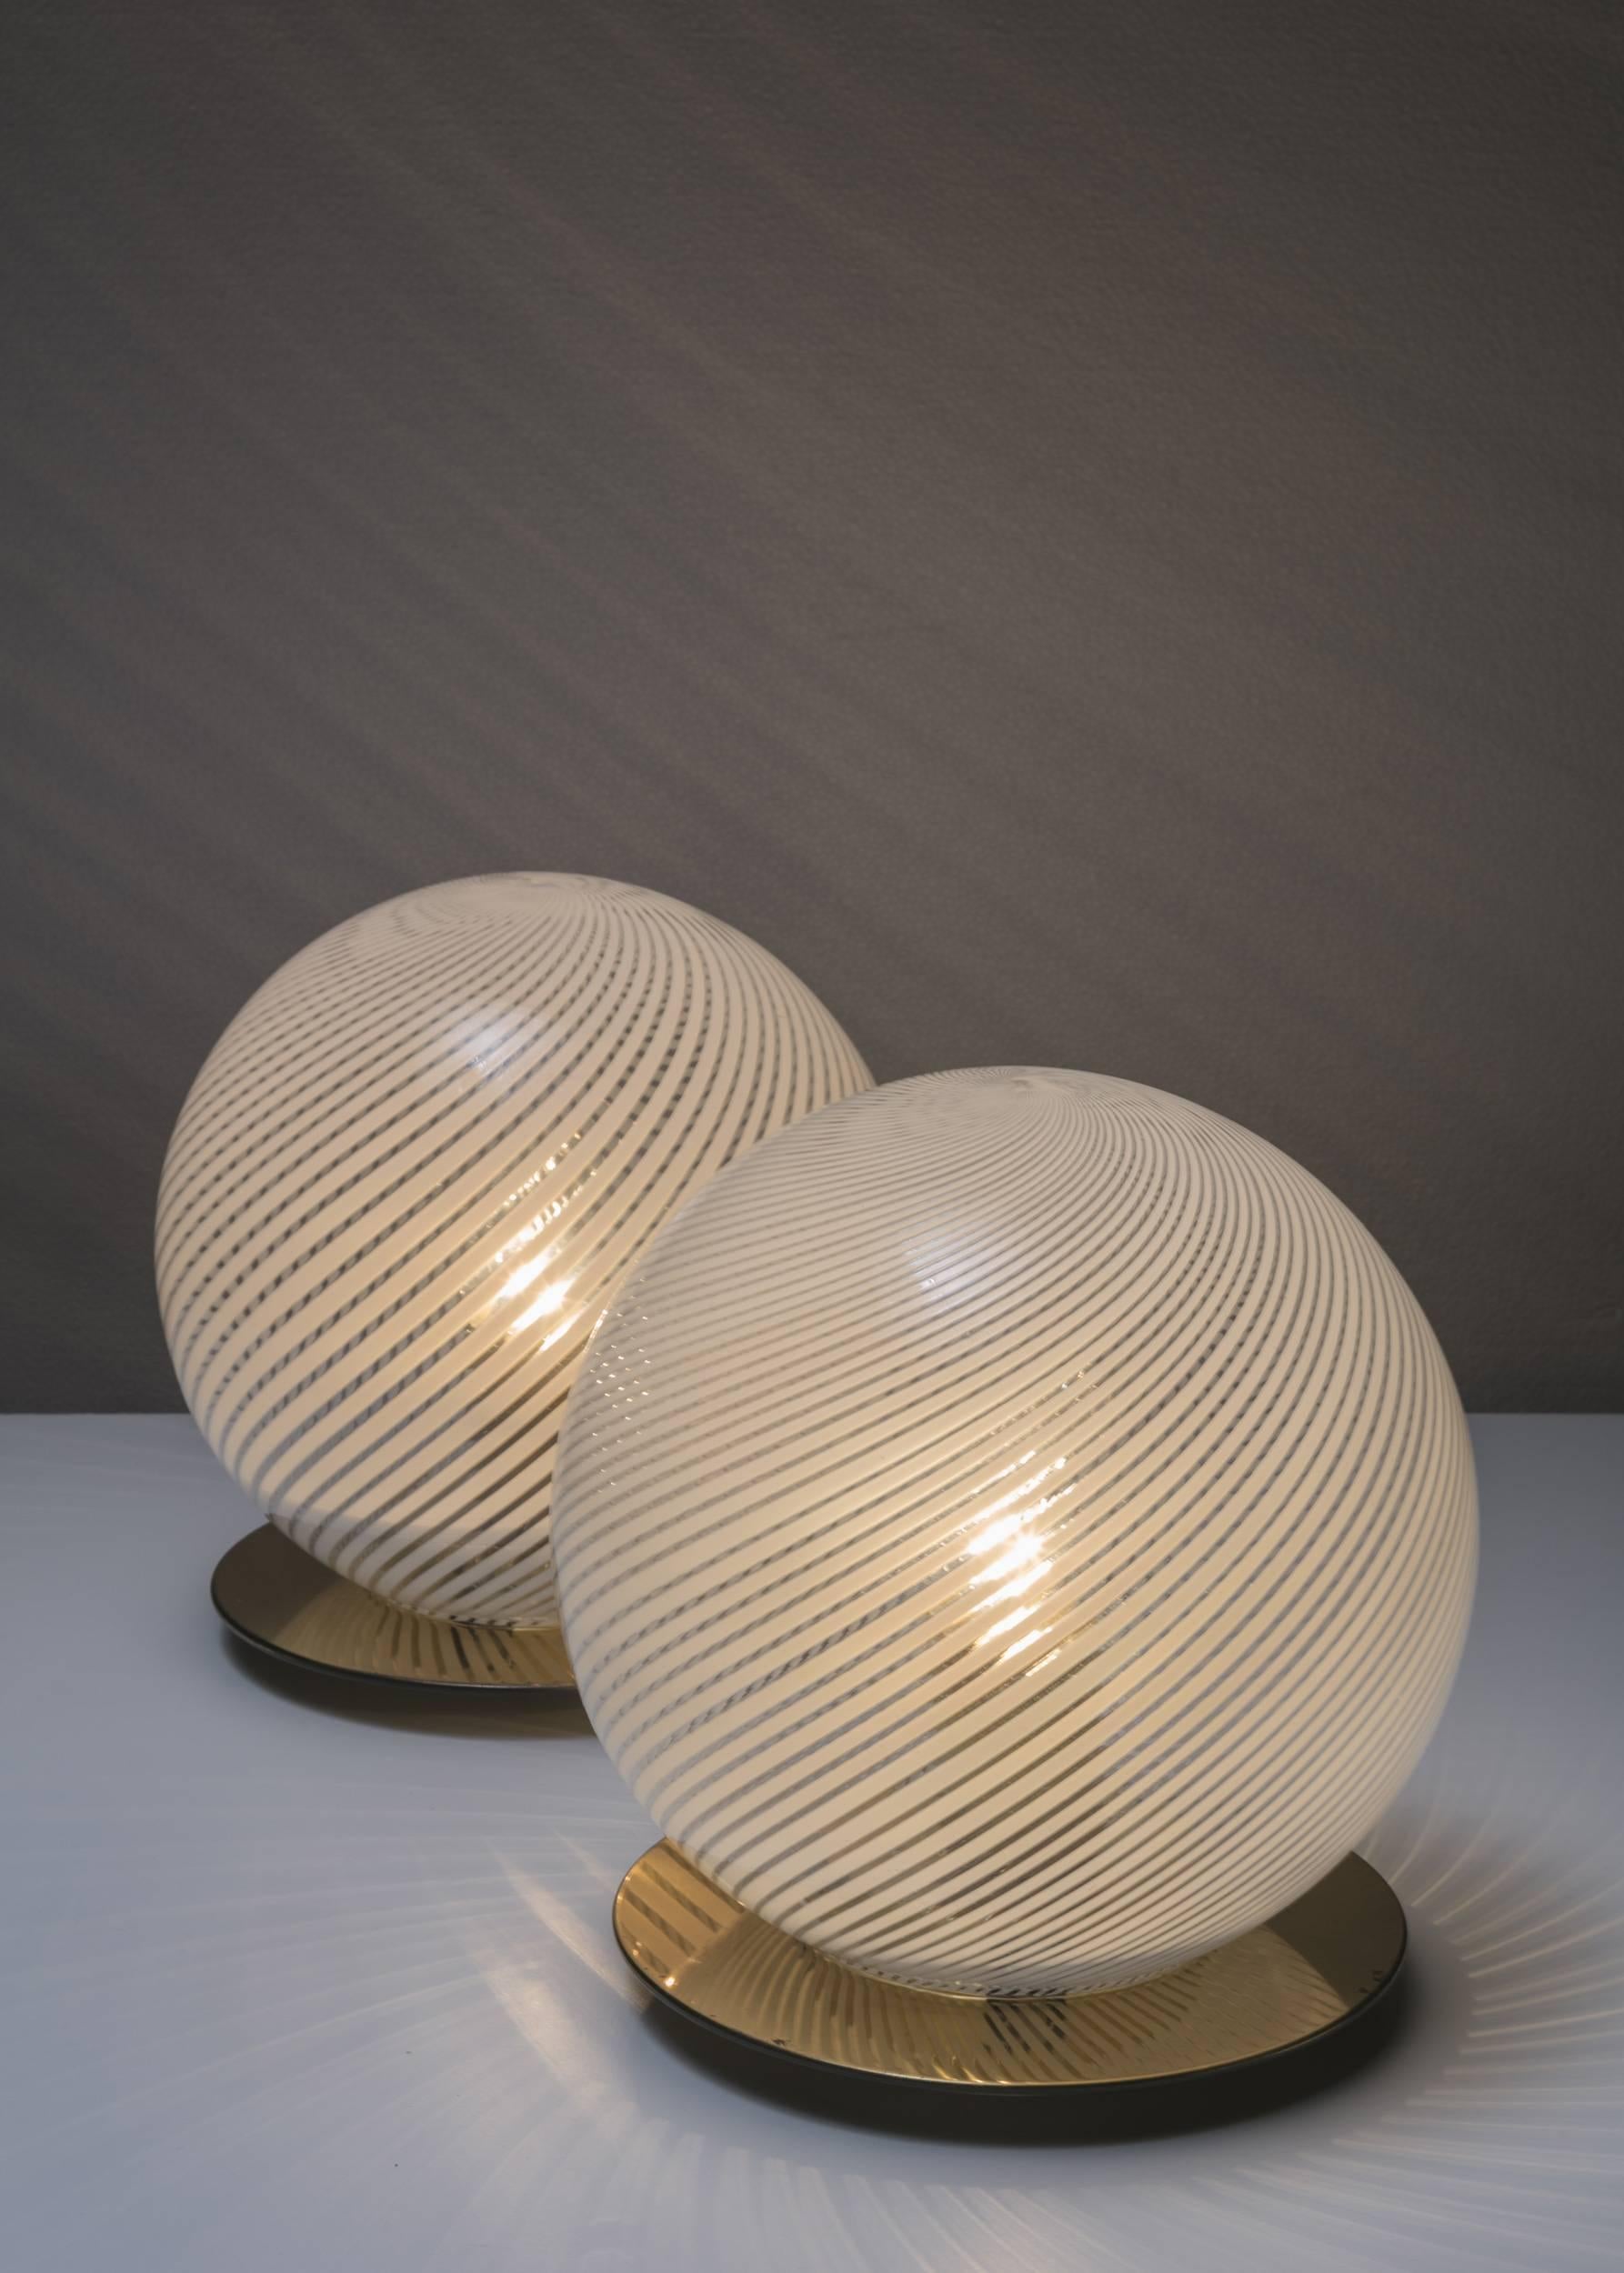 Set of two Tessuto table lamps by Tronconi.
Milky and crystal Murano glass shades and brass base.